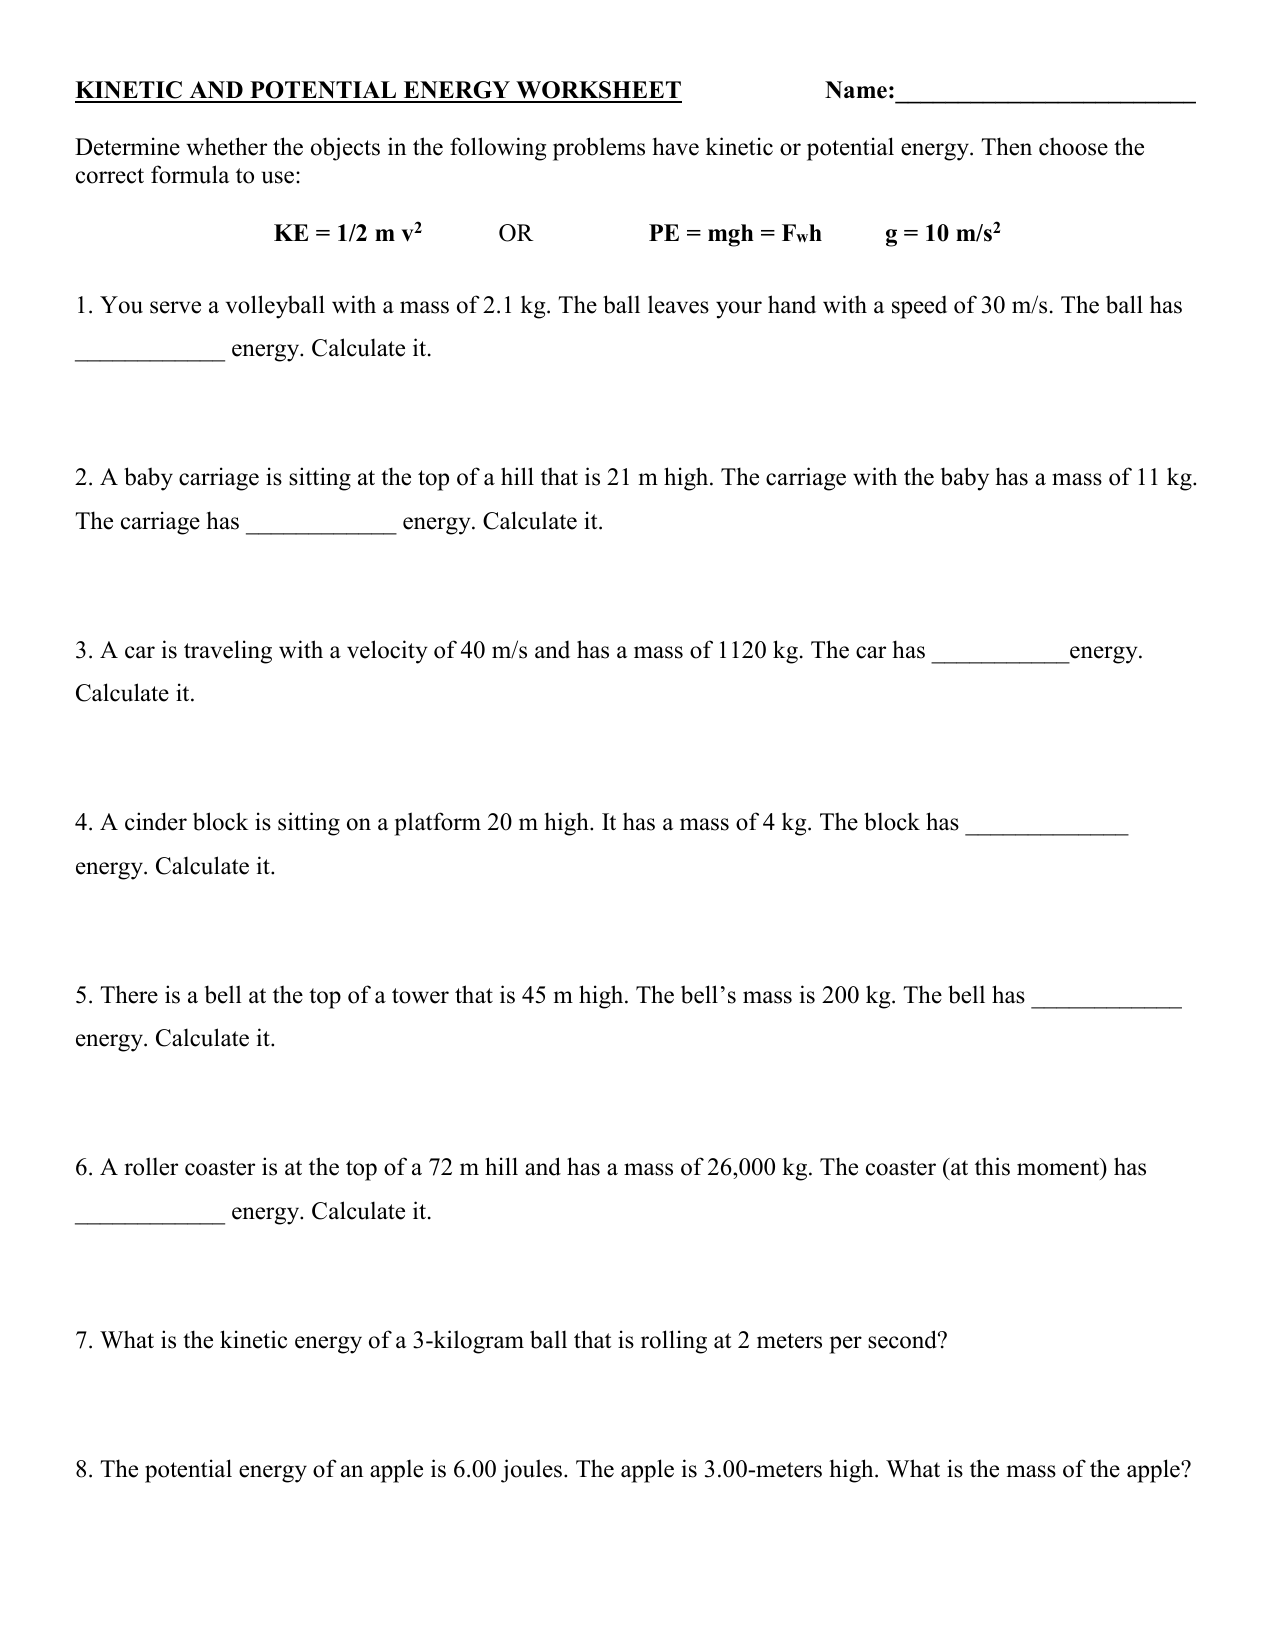 Kinetic and Potential Energy Worksheet Throughout Kinetic And Potential Energy Worksheet